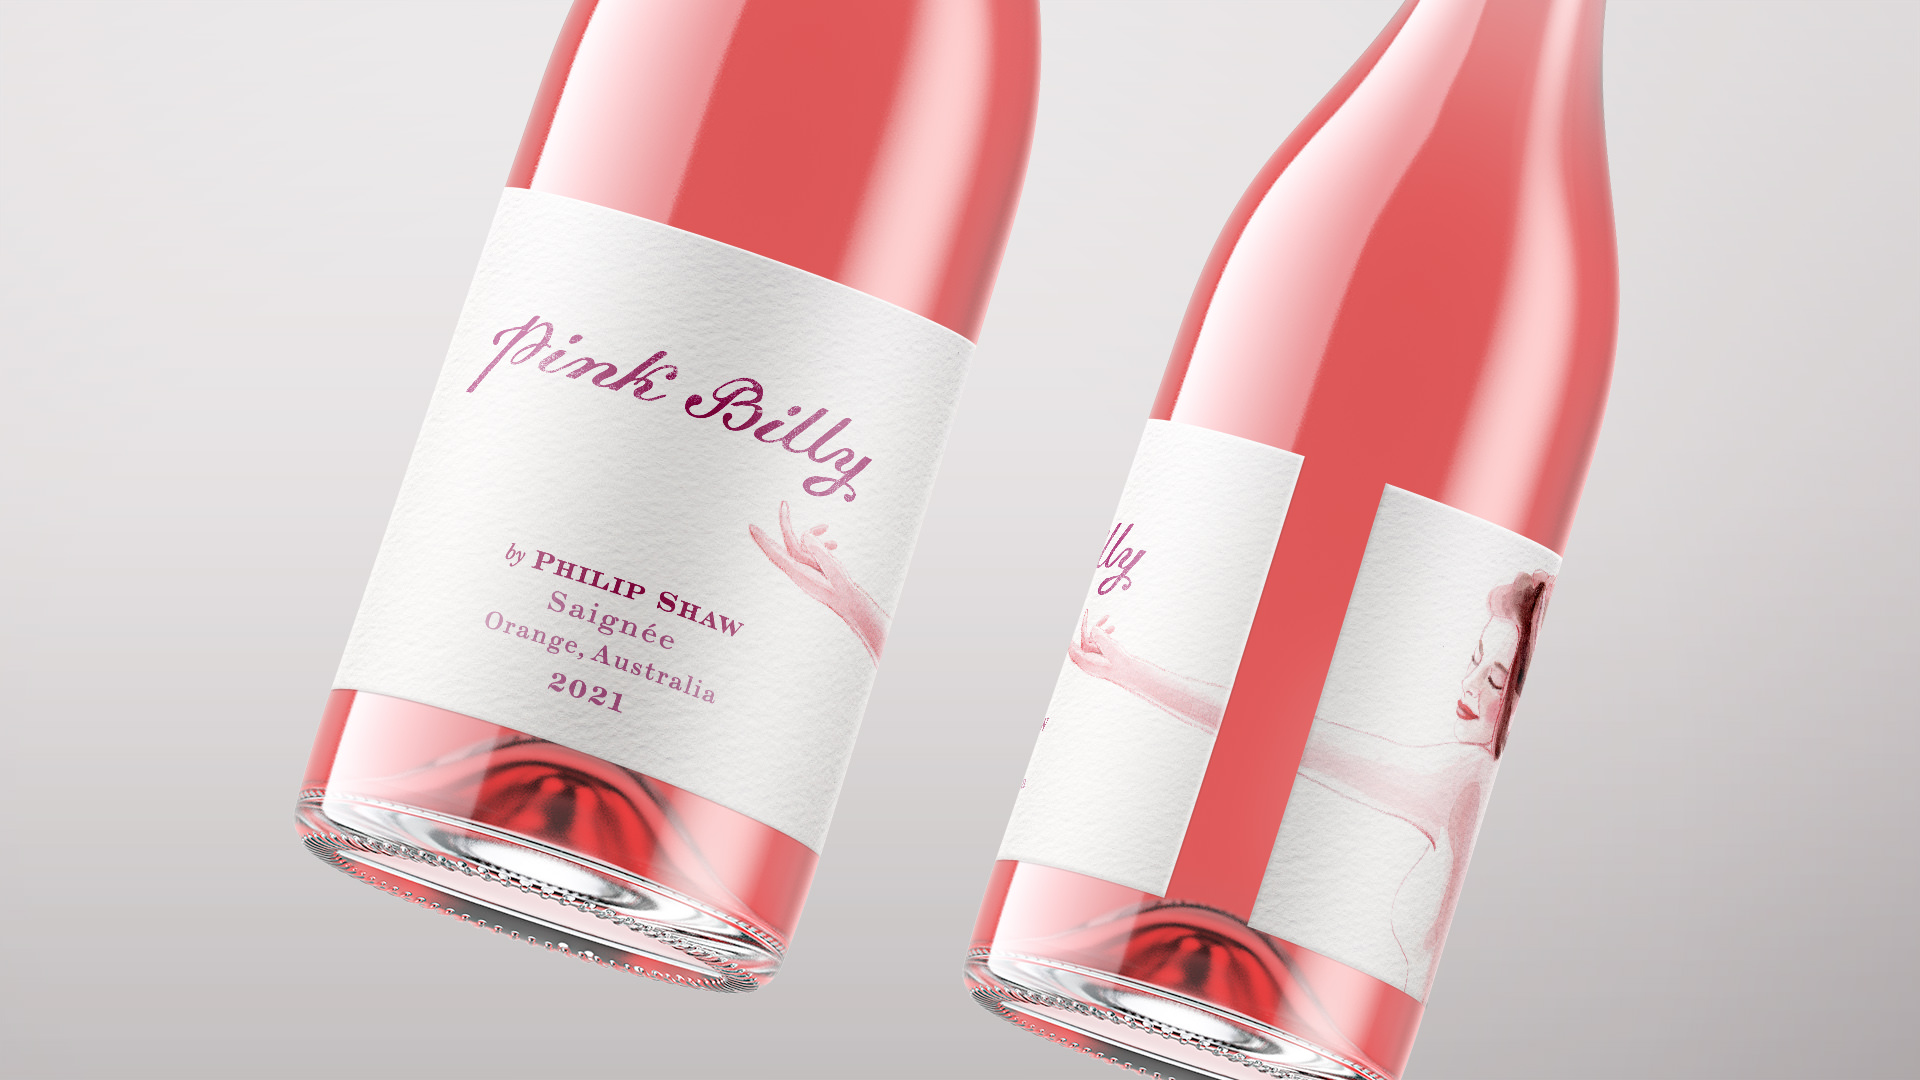 Two wine bottles for the Philip Shaw Saignée named Pink Billy. Imagery shows the wrap around label that features a woman reaching around the back label to be visible on the front label. Label designed by Helium Packaging Design Melbourne.